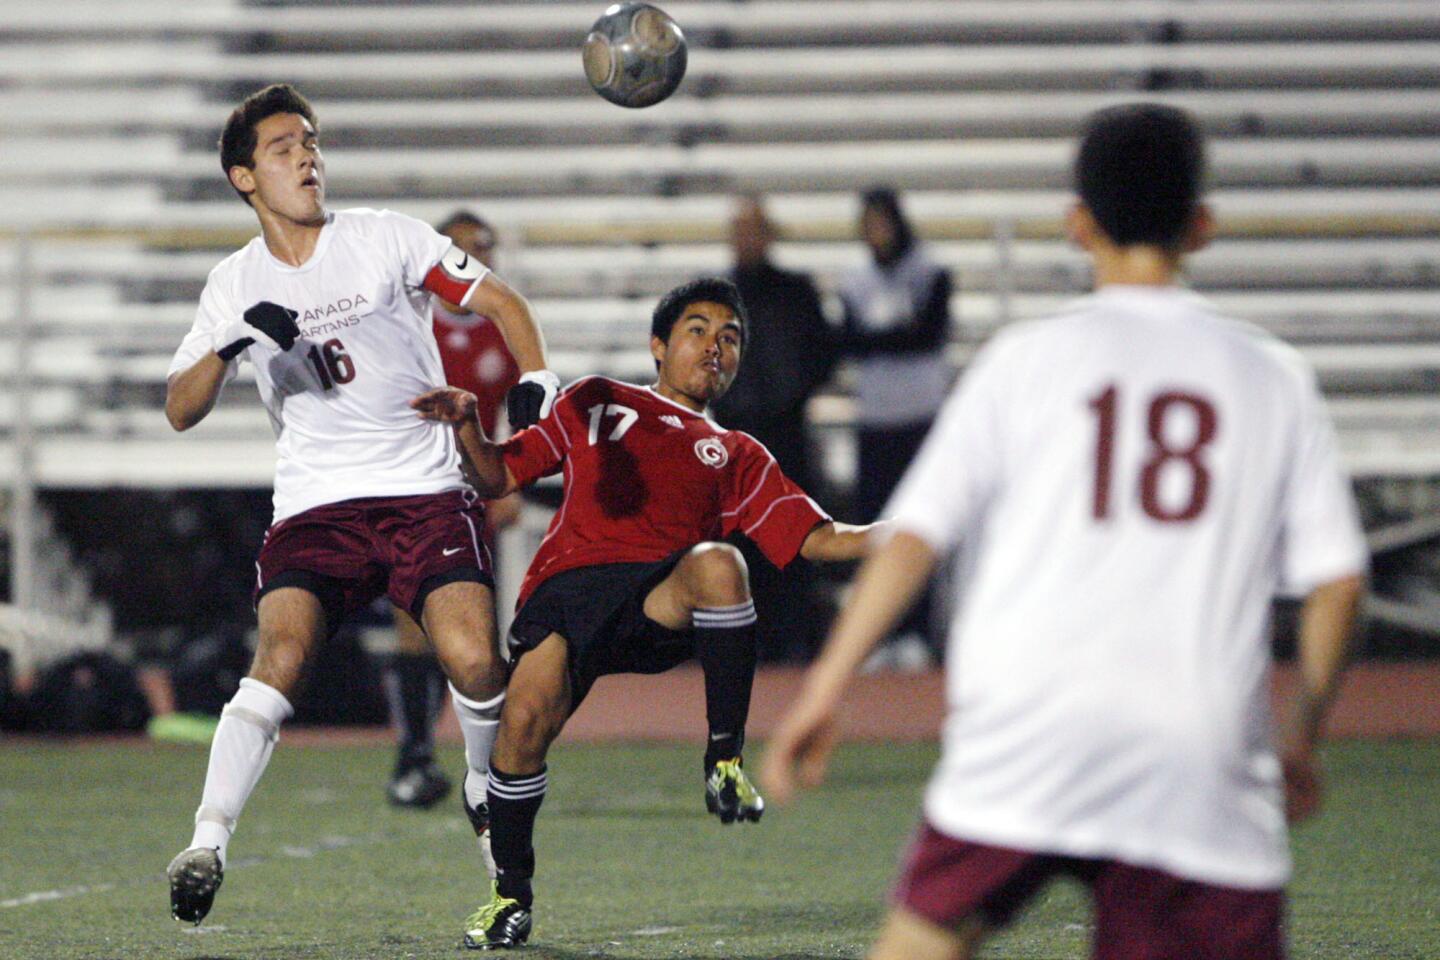 La Canada's Aidan Tourani, left, and Glendale's Albert Chamagua fight for the ball during a game at La Canada High School on Friday, December 28, 2012.